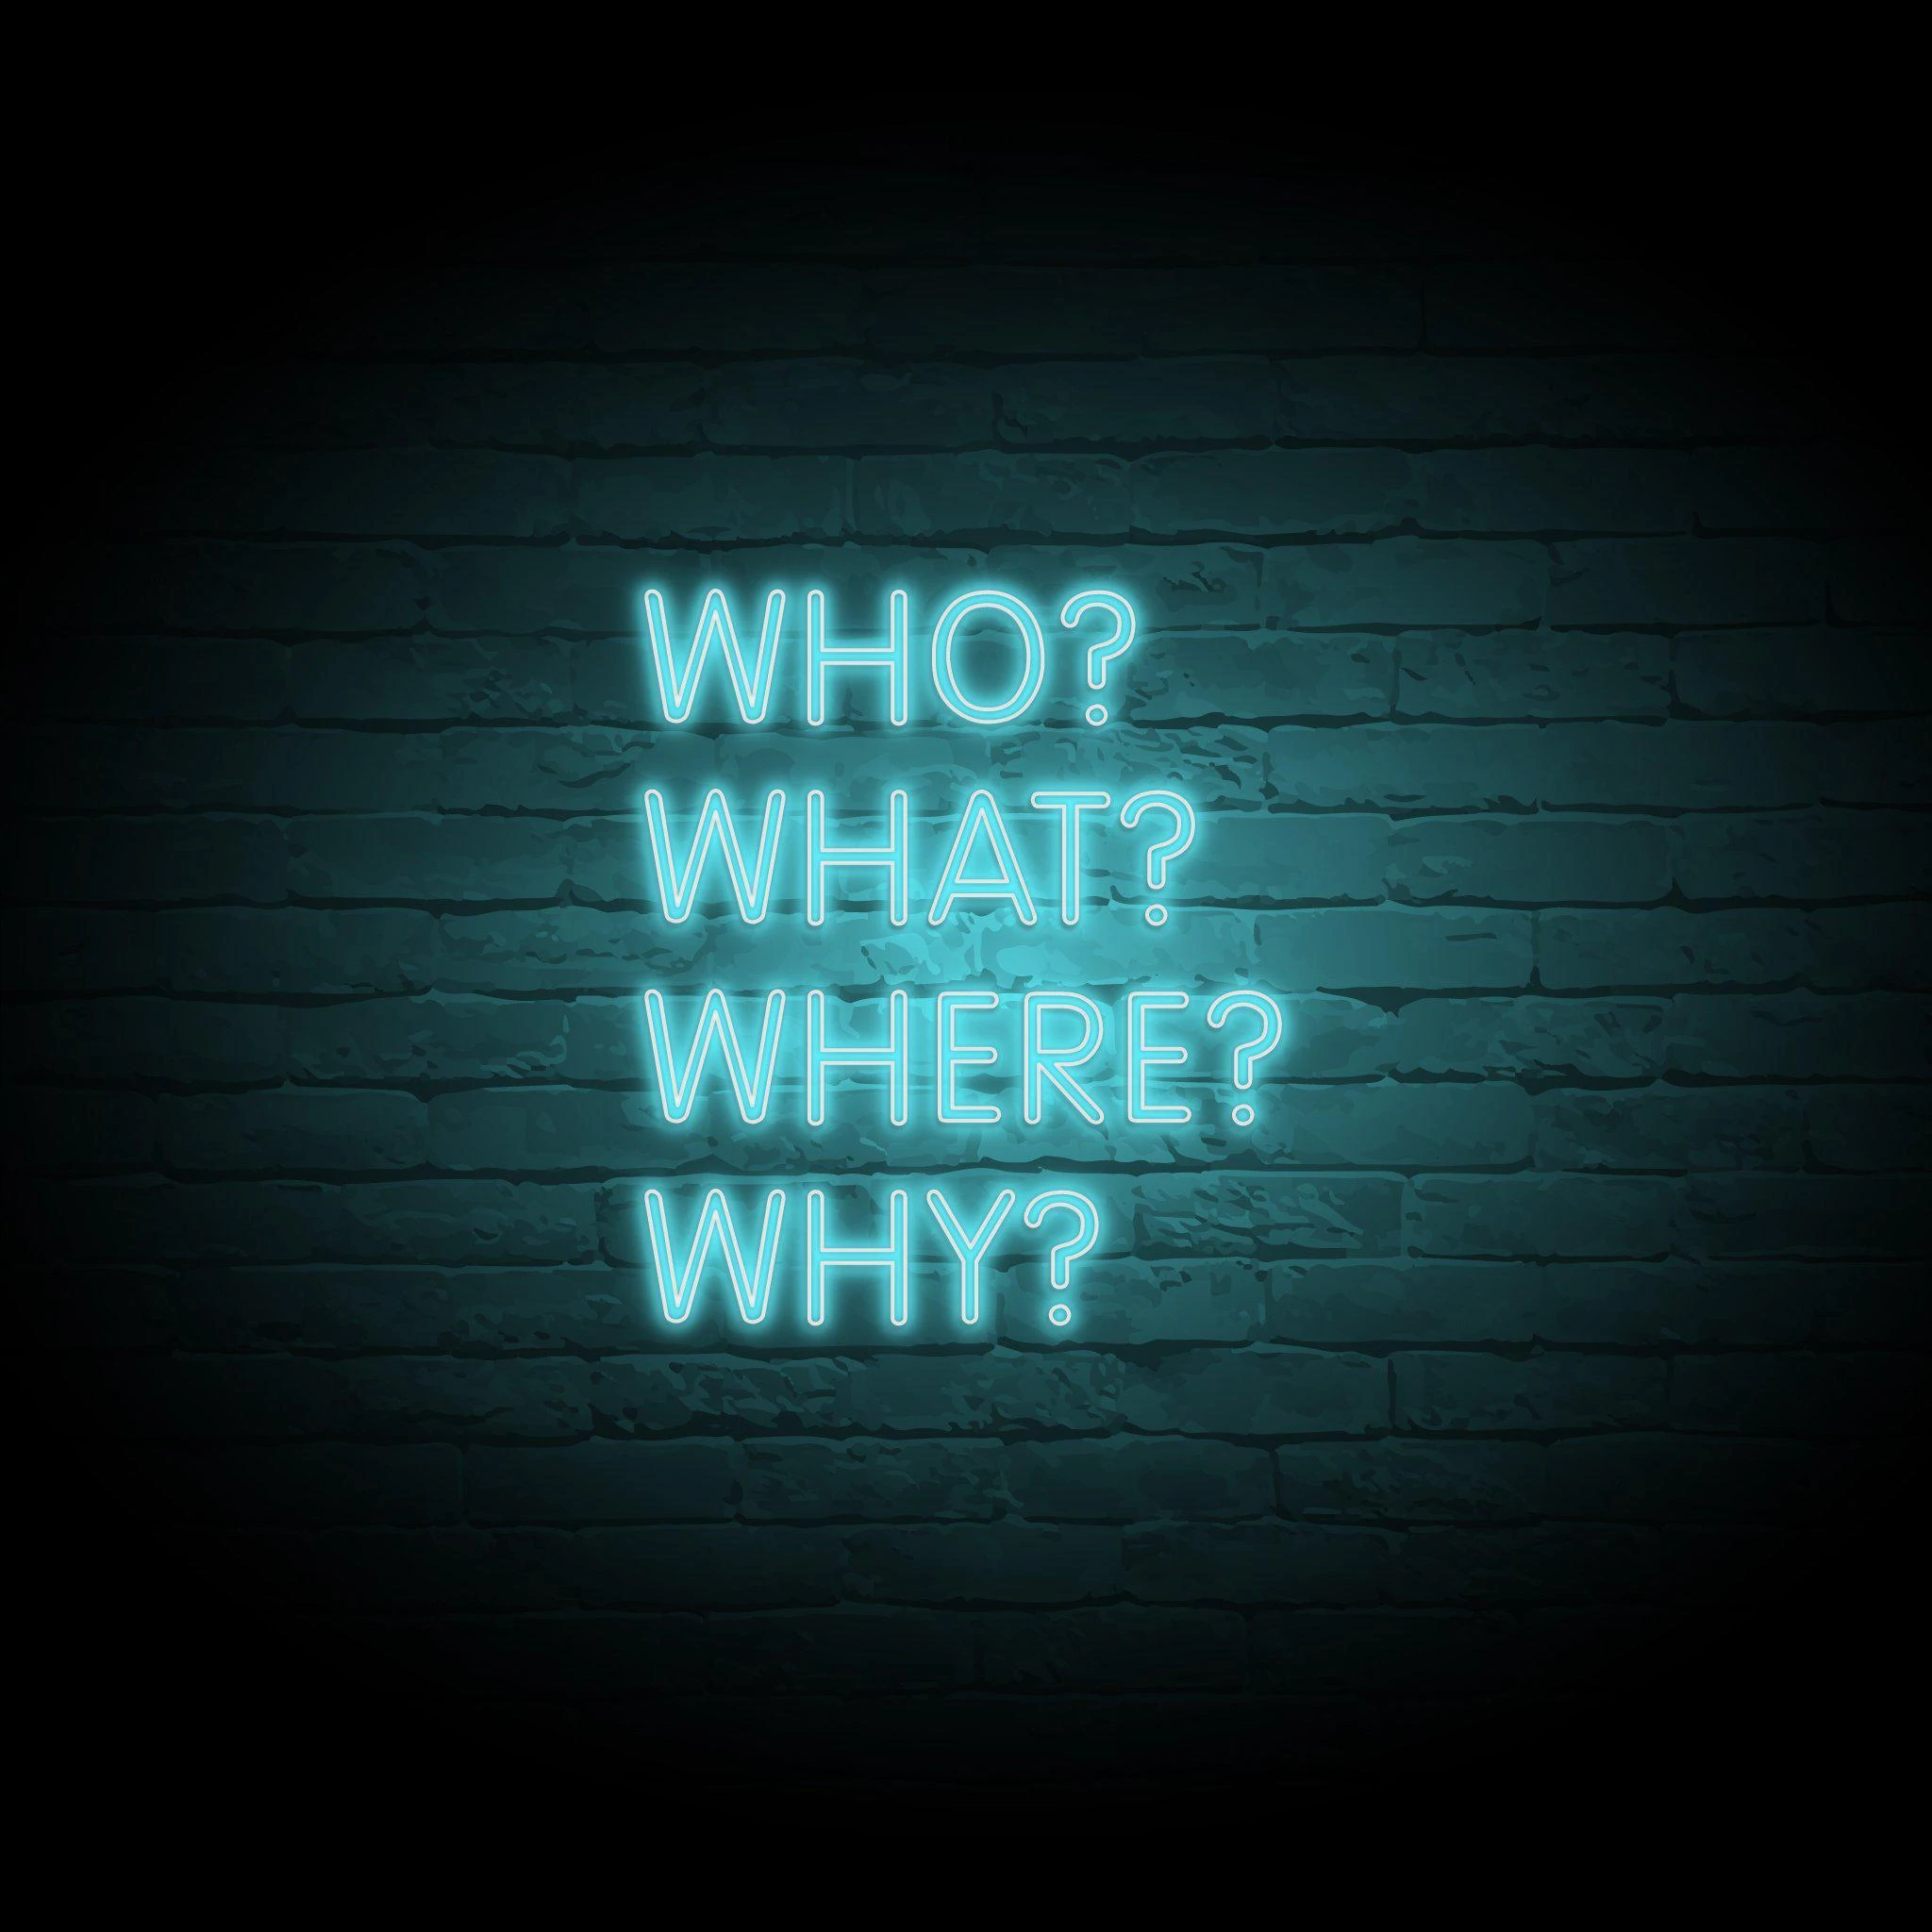 'WHO? WHAT? WHERE? WHY?' NEON SIGN